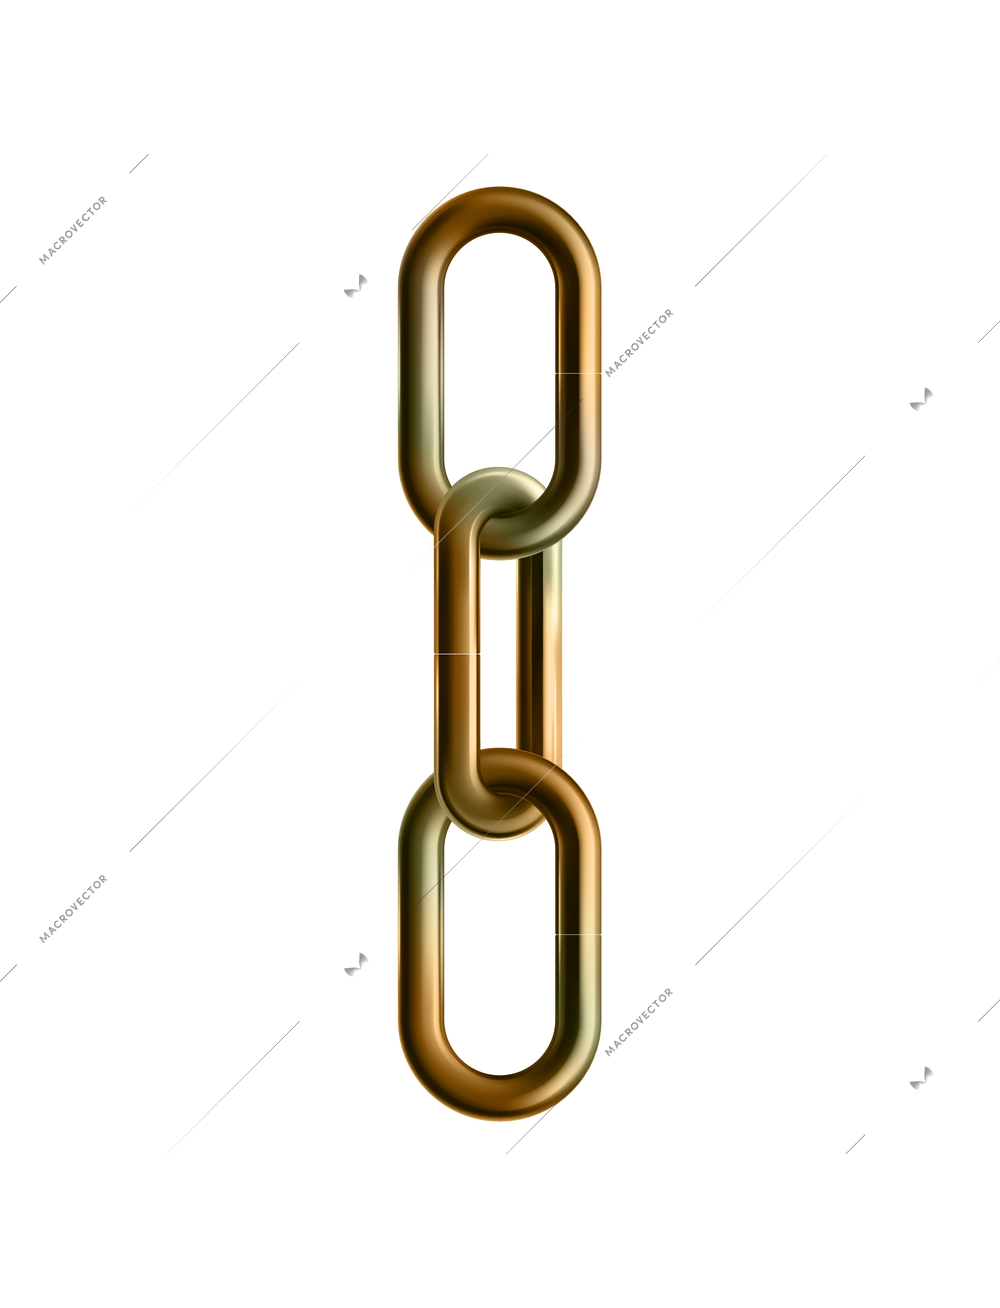 Golden chain realistic composition of hanging golden chain segments on blank background vector illustration